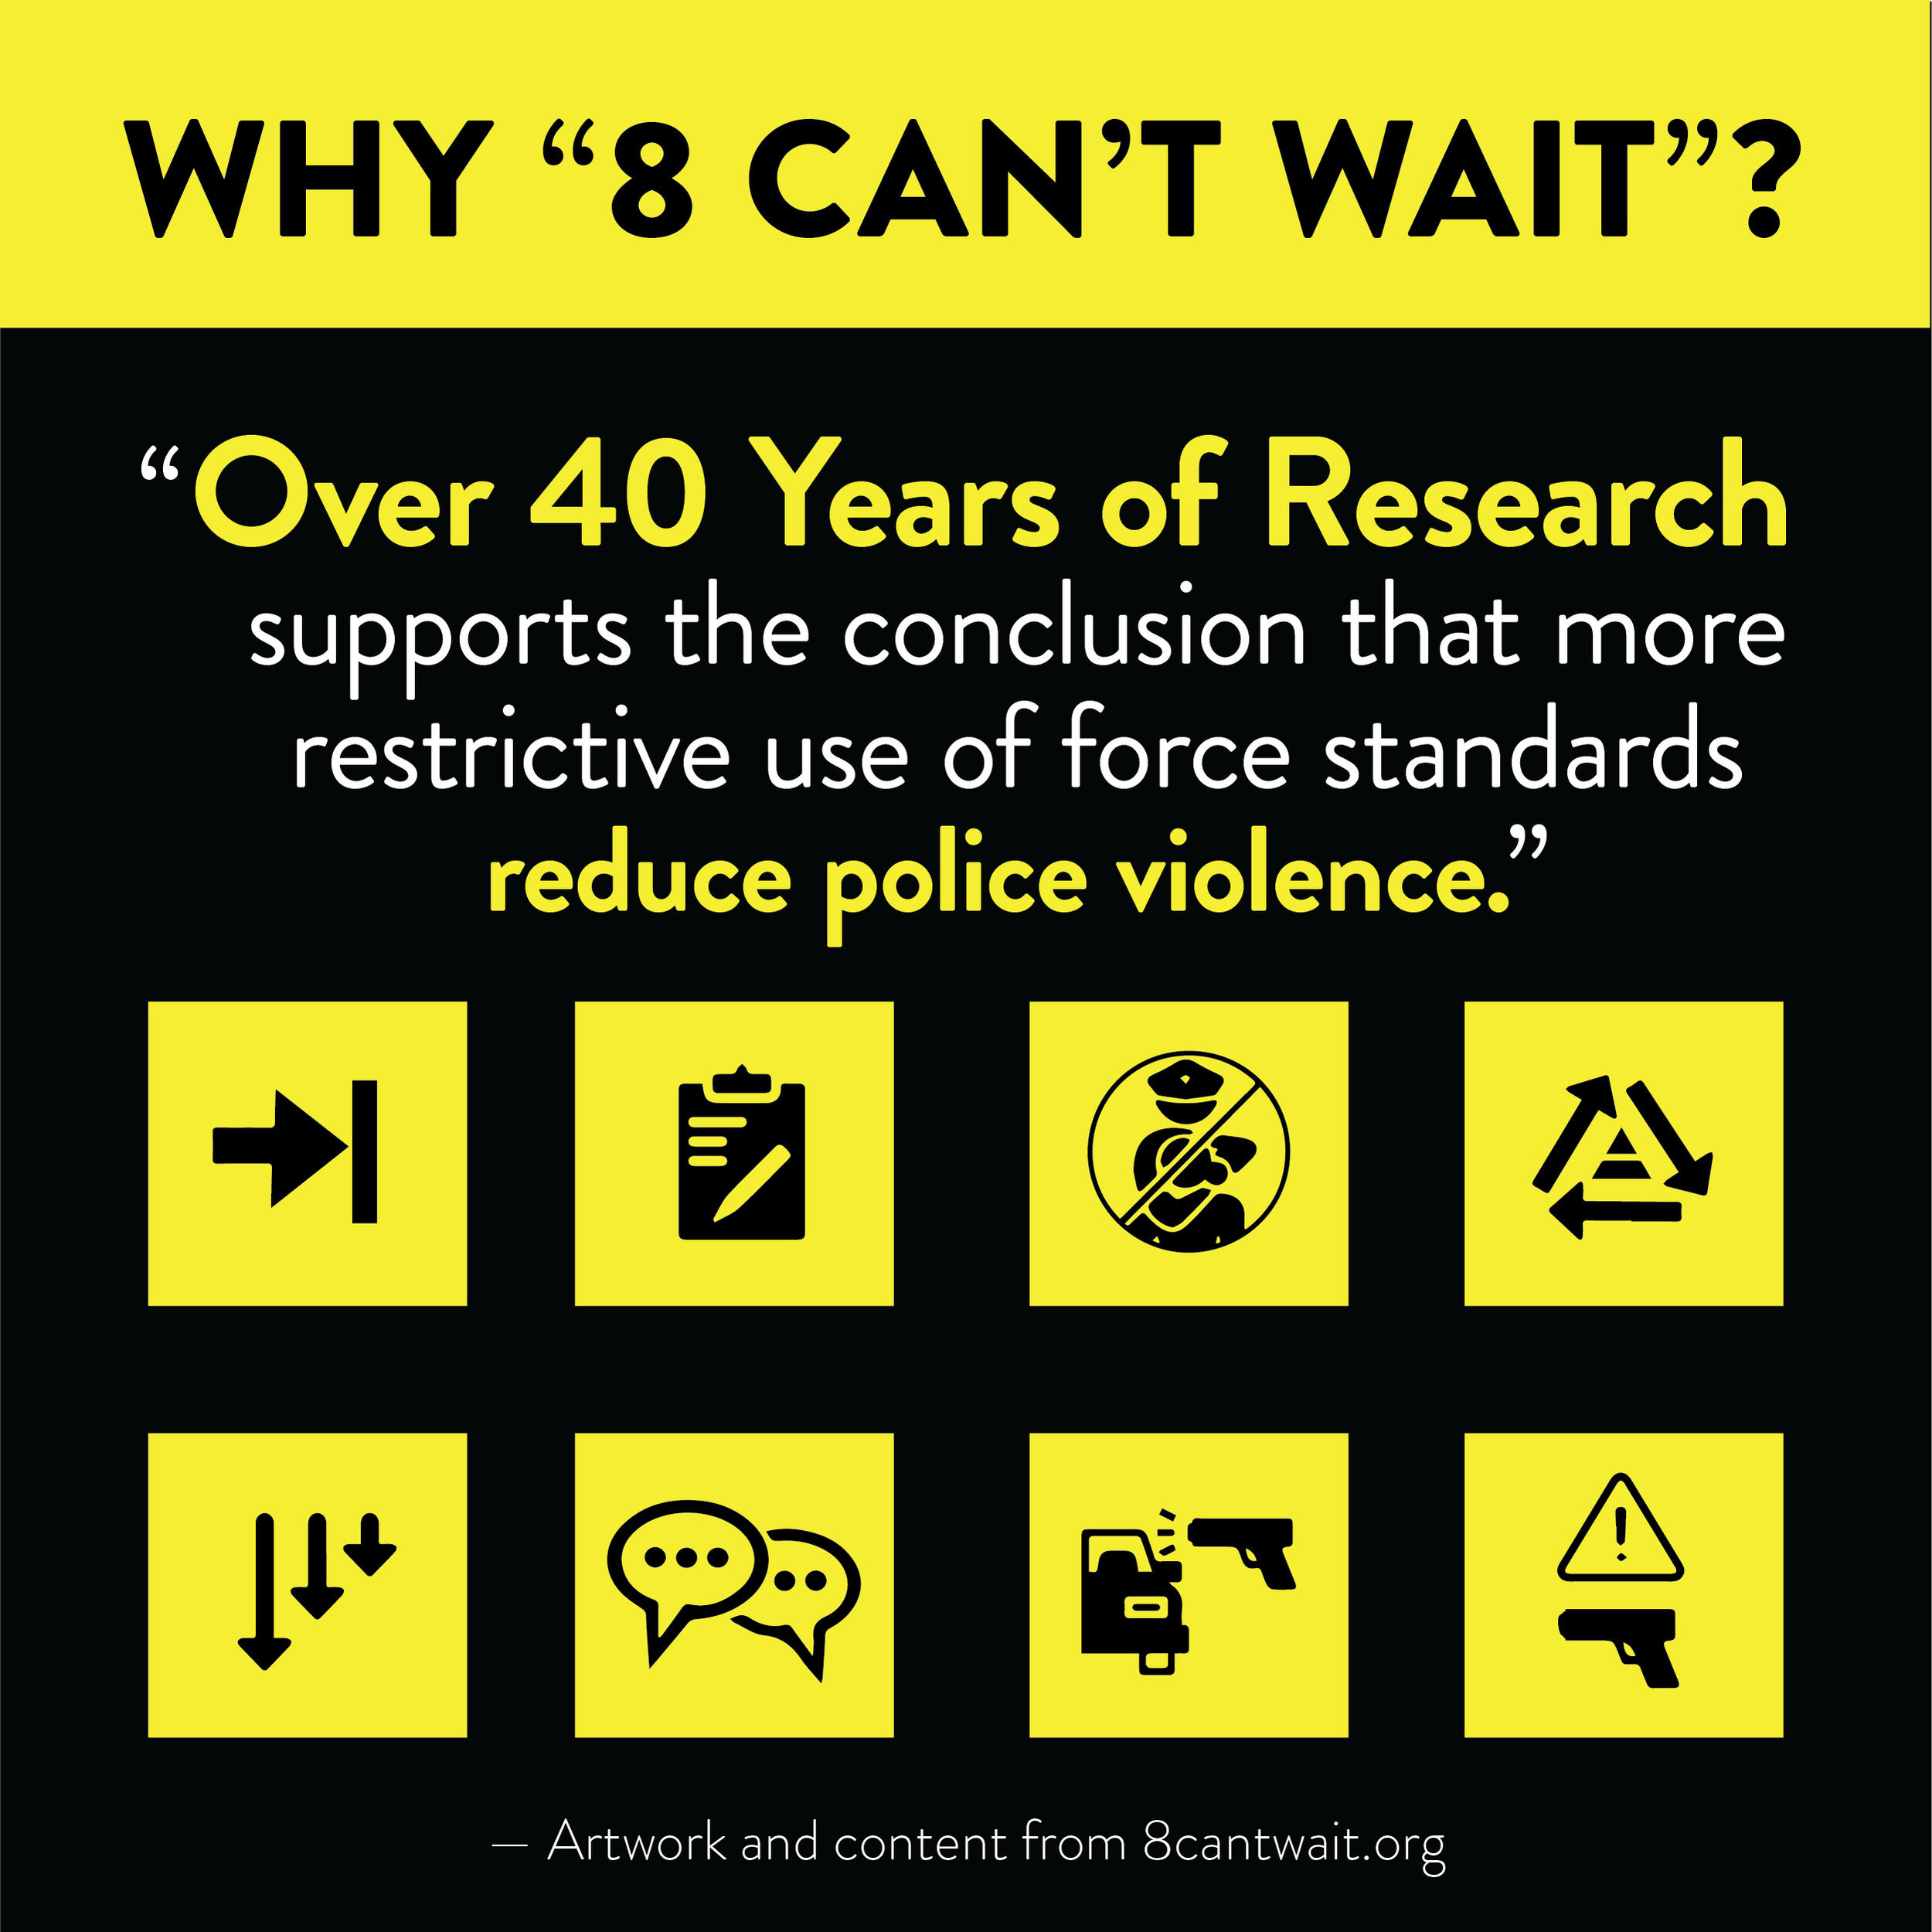 Why8CantWait_40YearsofResearch.jpg